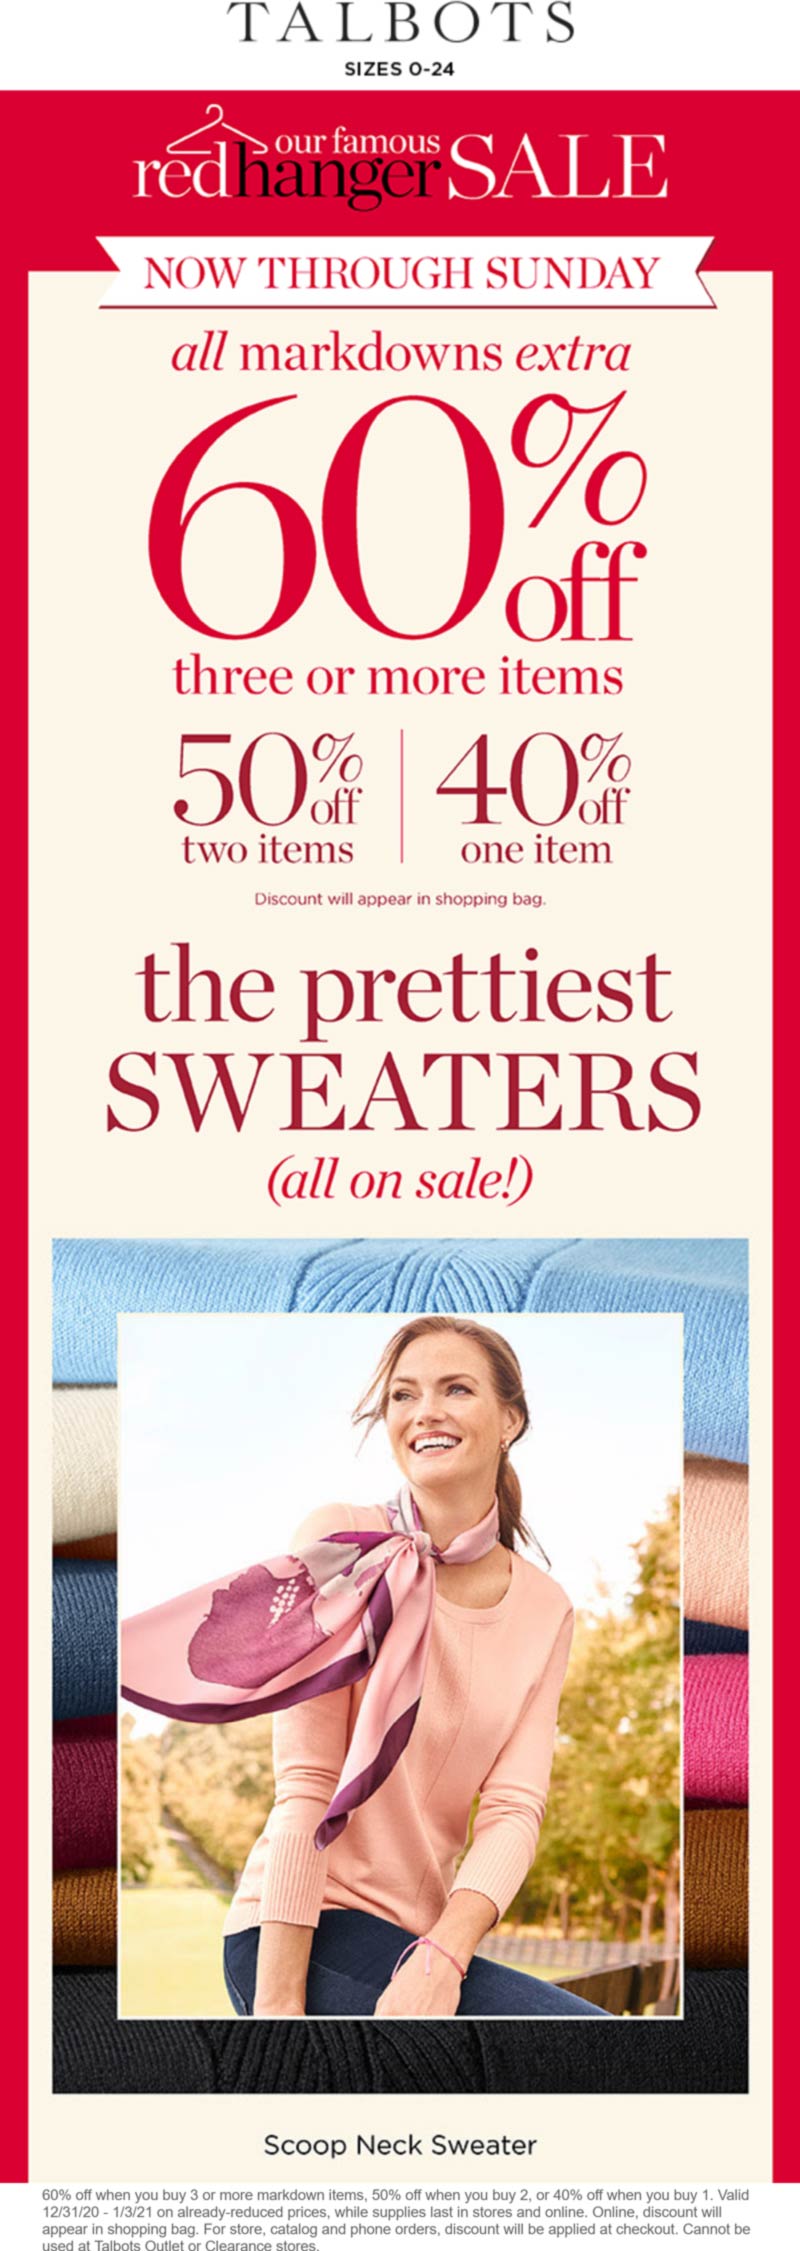 Talbots stores Coupon  Extra 40-60% off sale items at Talbots, ditto online #talbots 